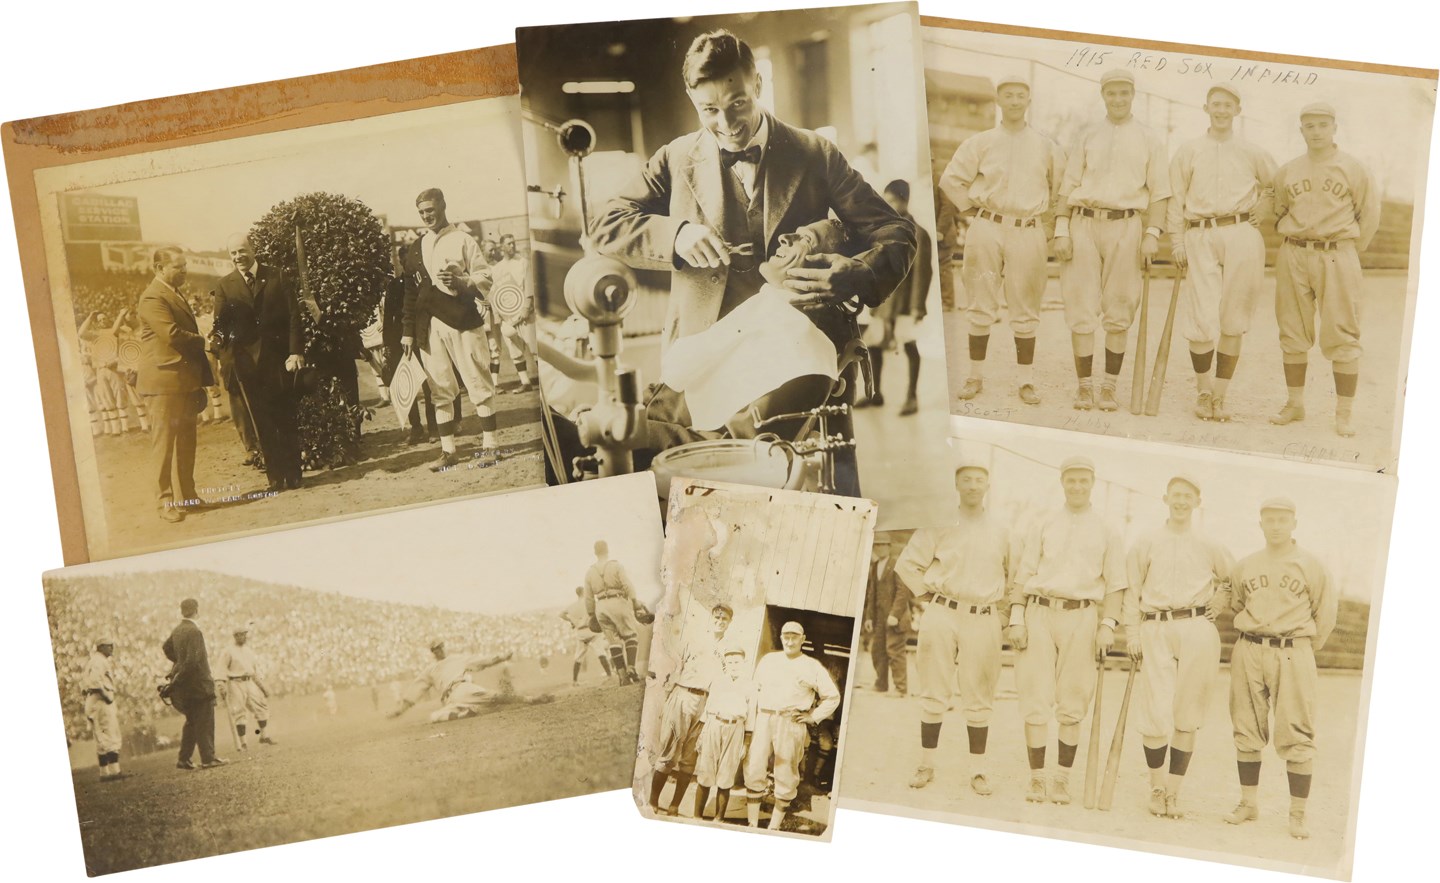 Vintage Sports Photographs - 1910s-1920s Dick Hoblitzell Original Photograph Collection w/Honus Wagner & 1915 Red Sox from The Dick Hoblitzell Collection (6)